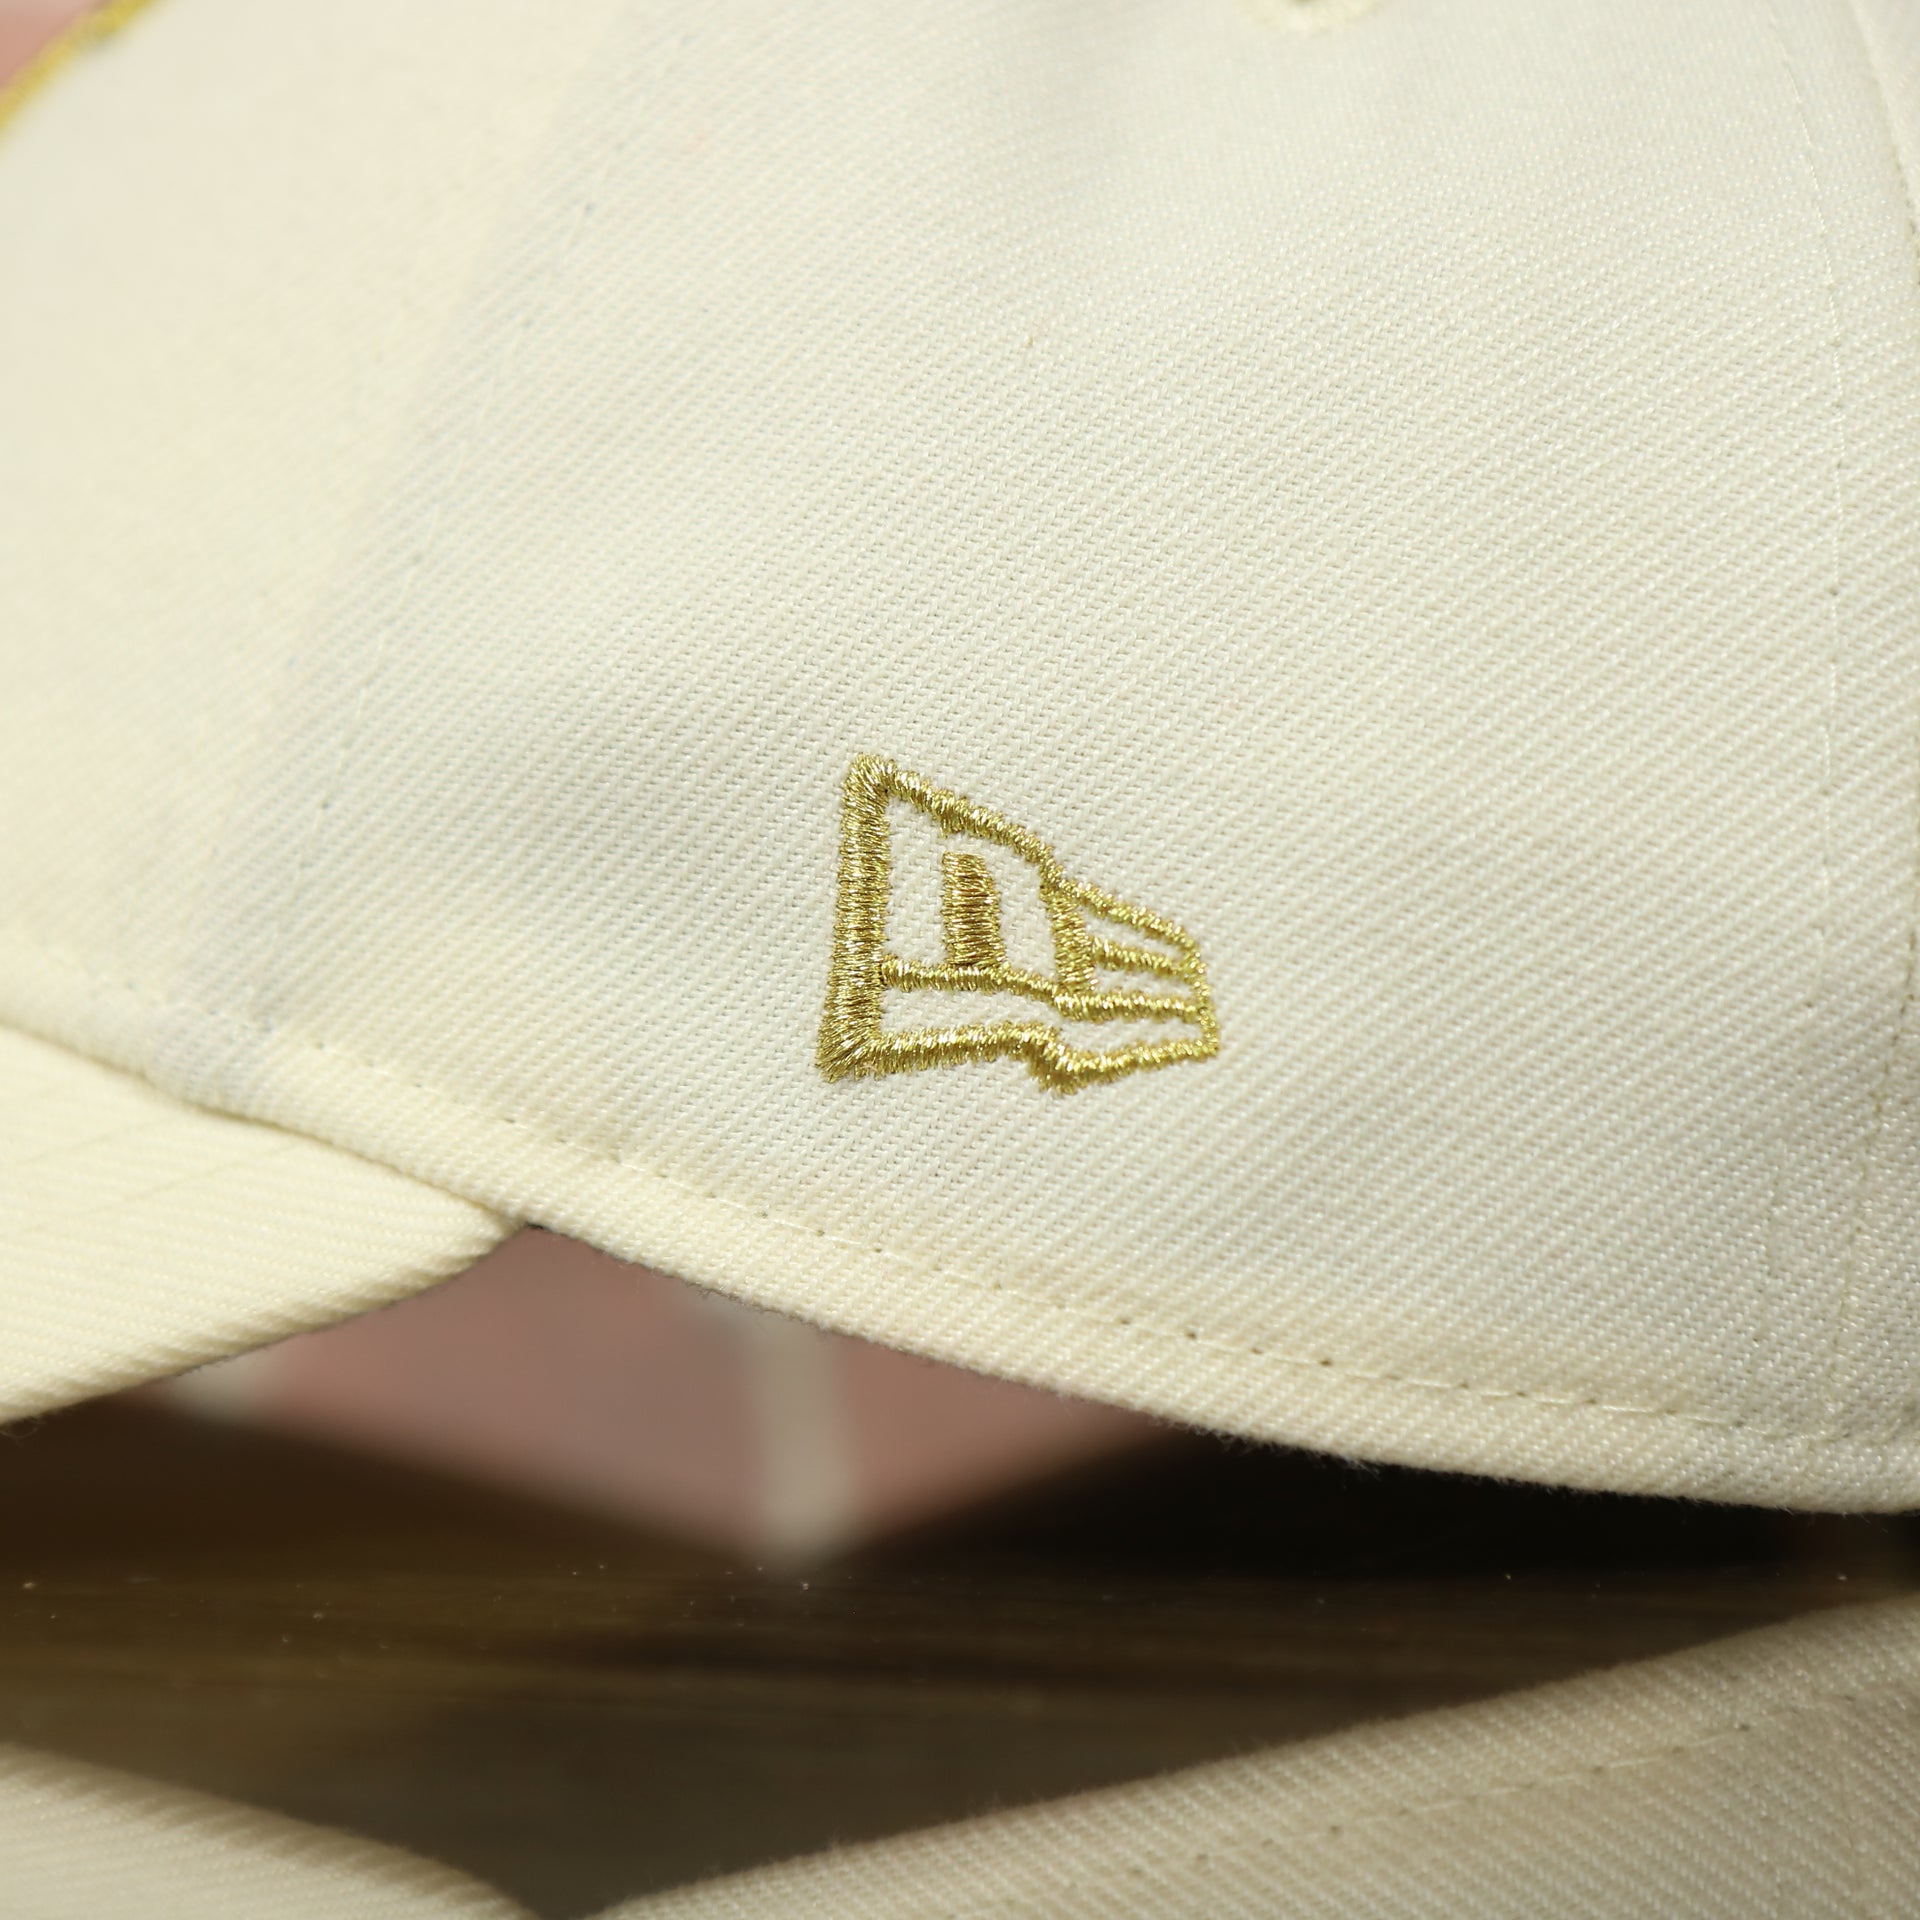 new era logo on the Sixers Snapback hat  Phildelphia 76ers vintage white Dad hat with gold embroidery New era 920